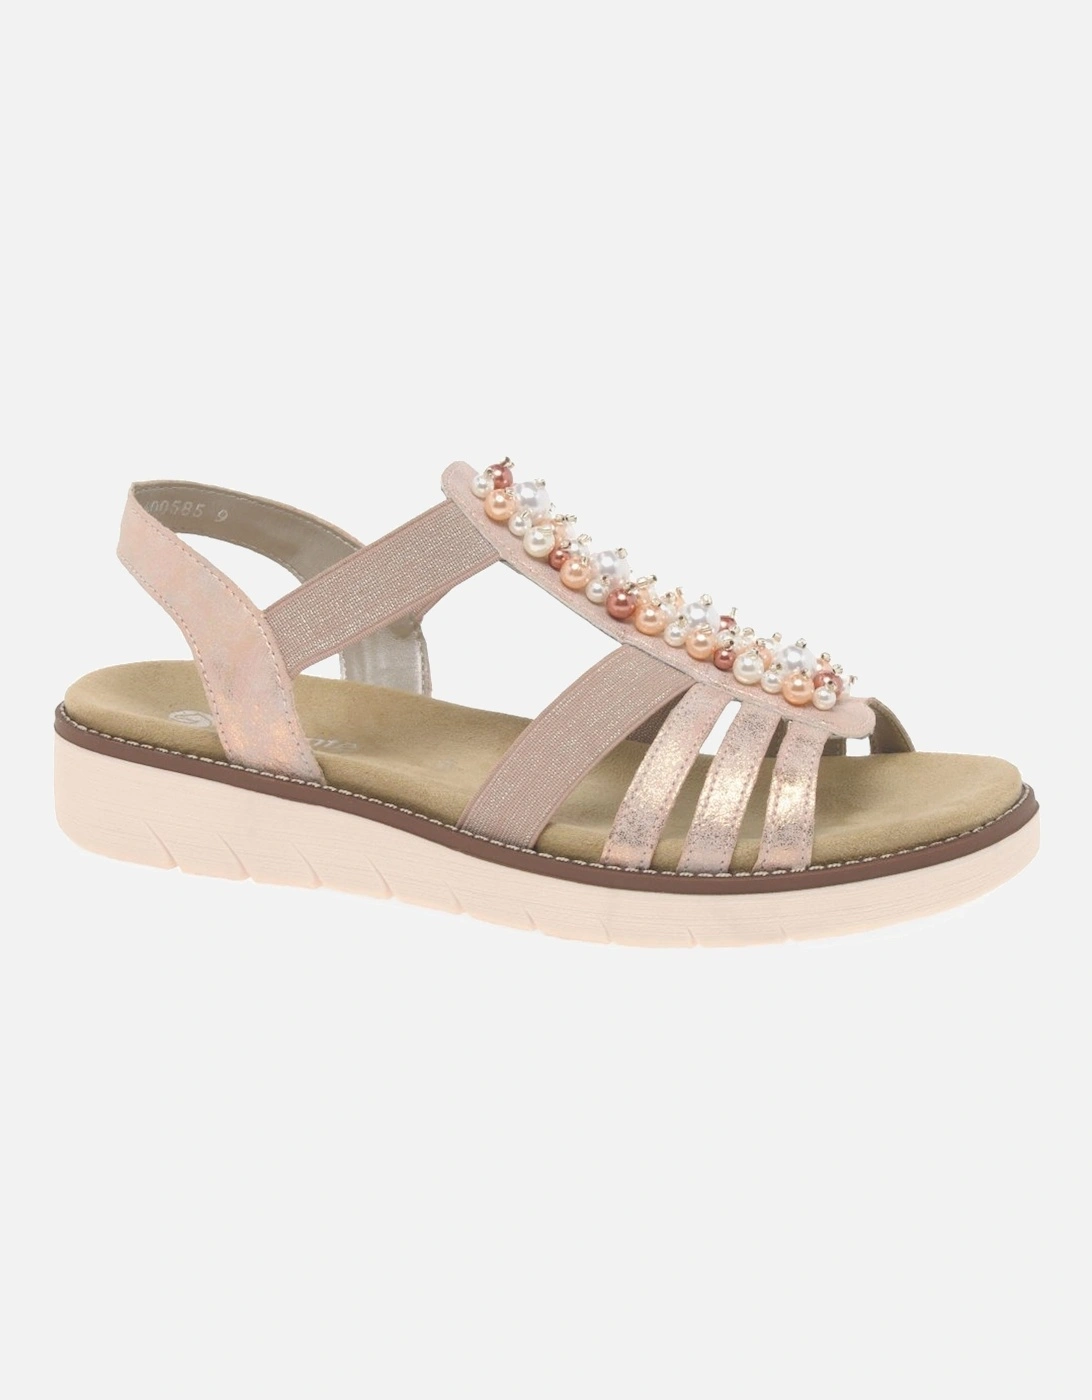 Intimate Womens Sandals, 8 of 7